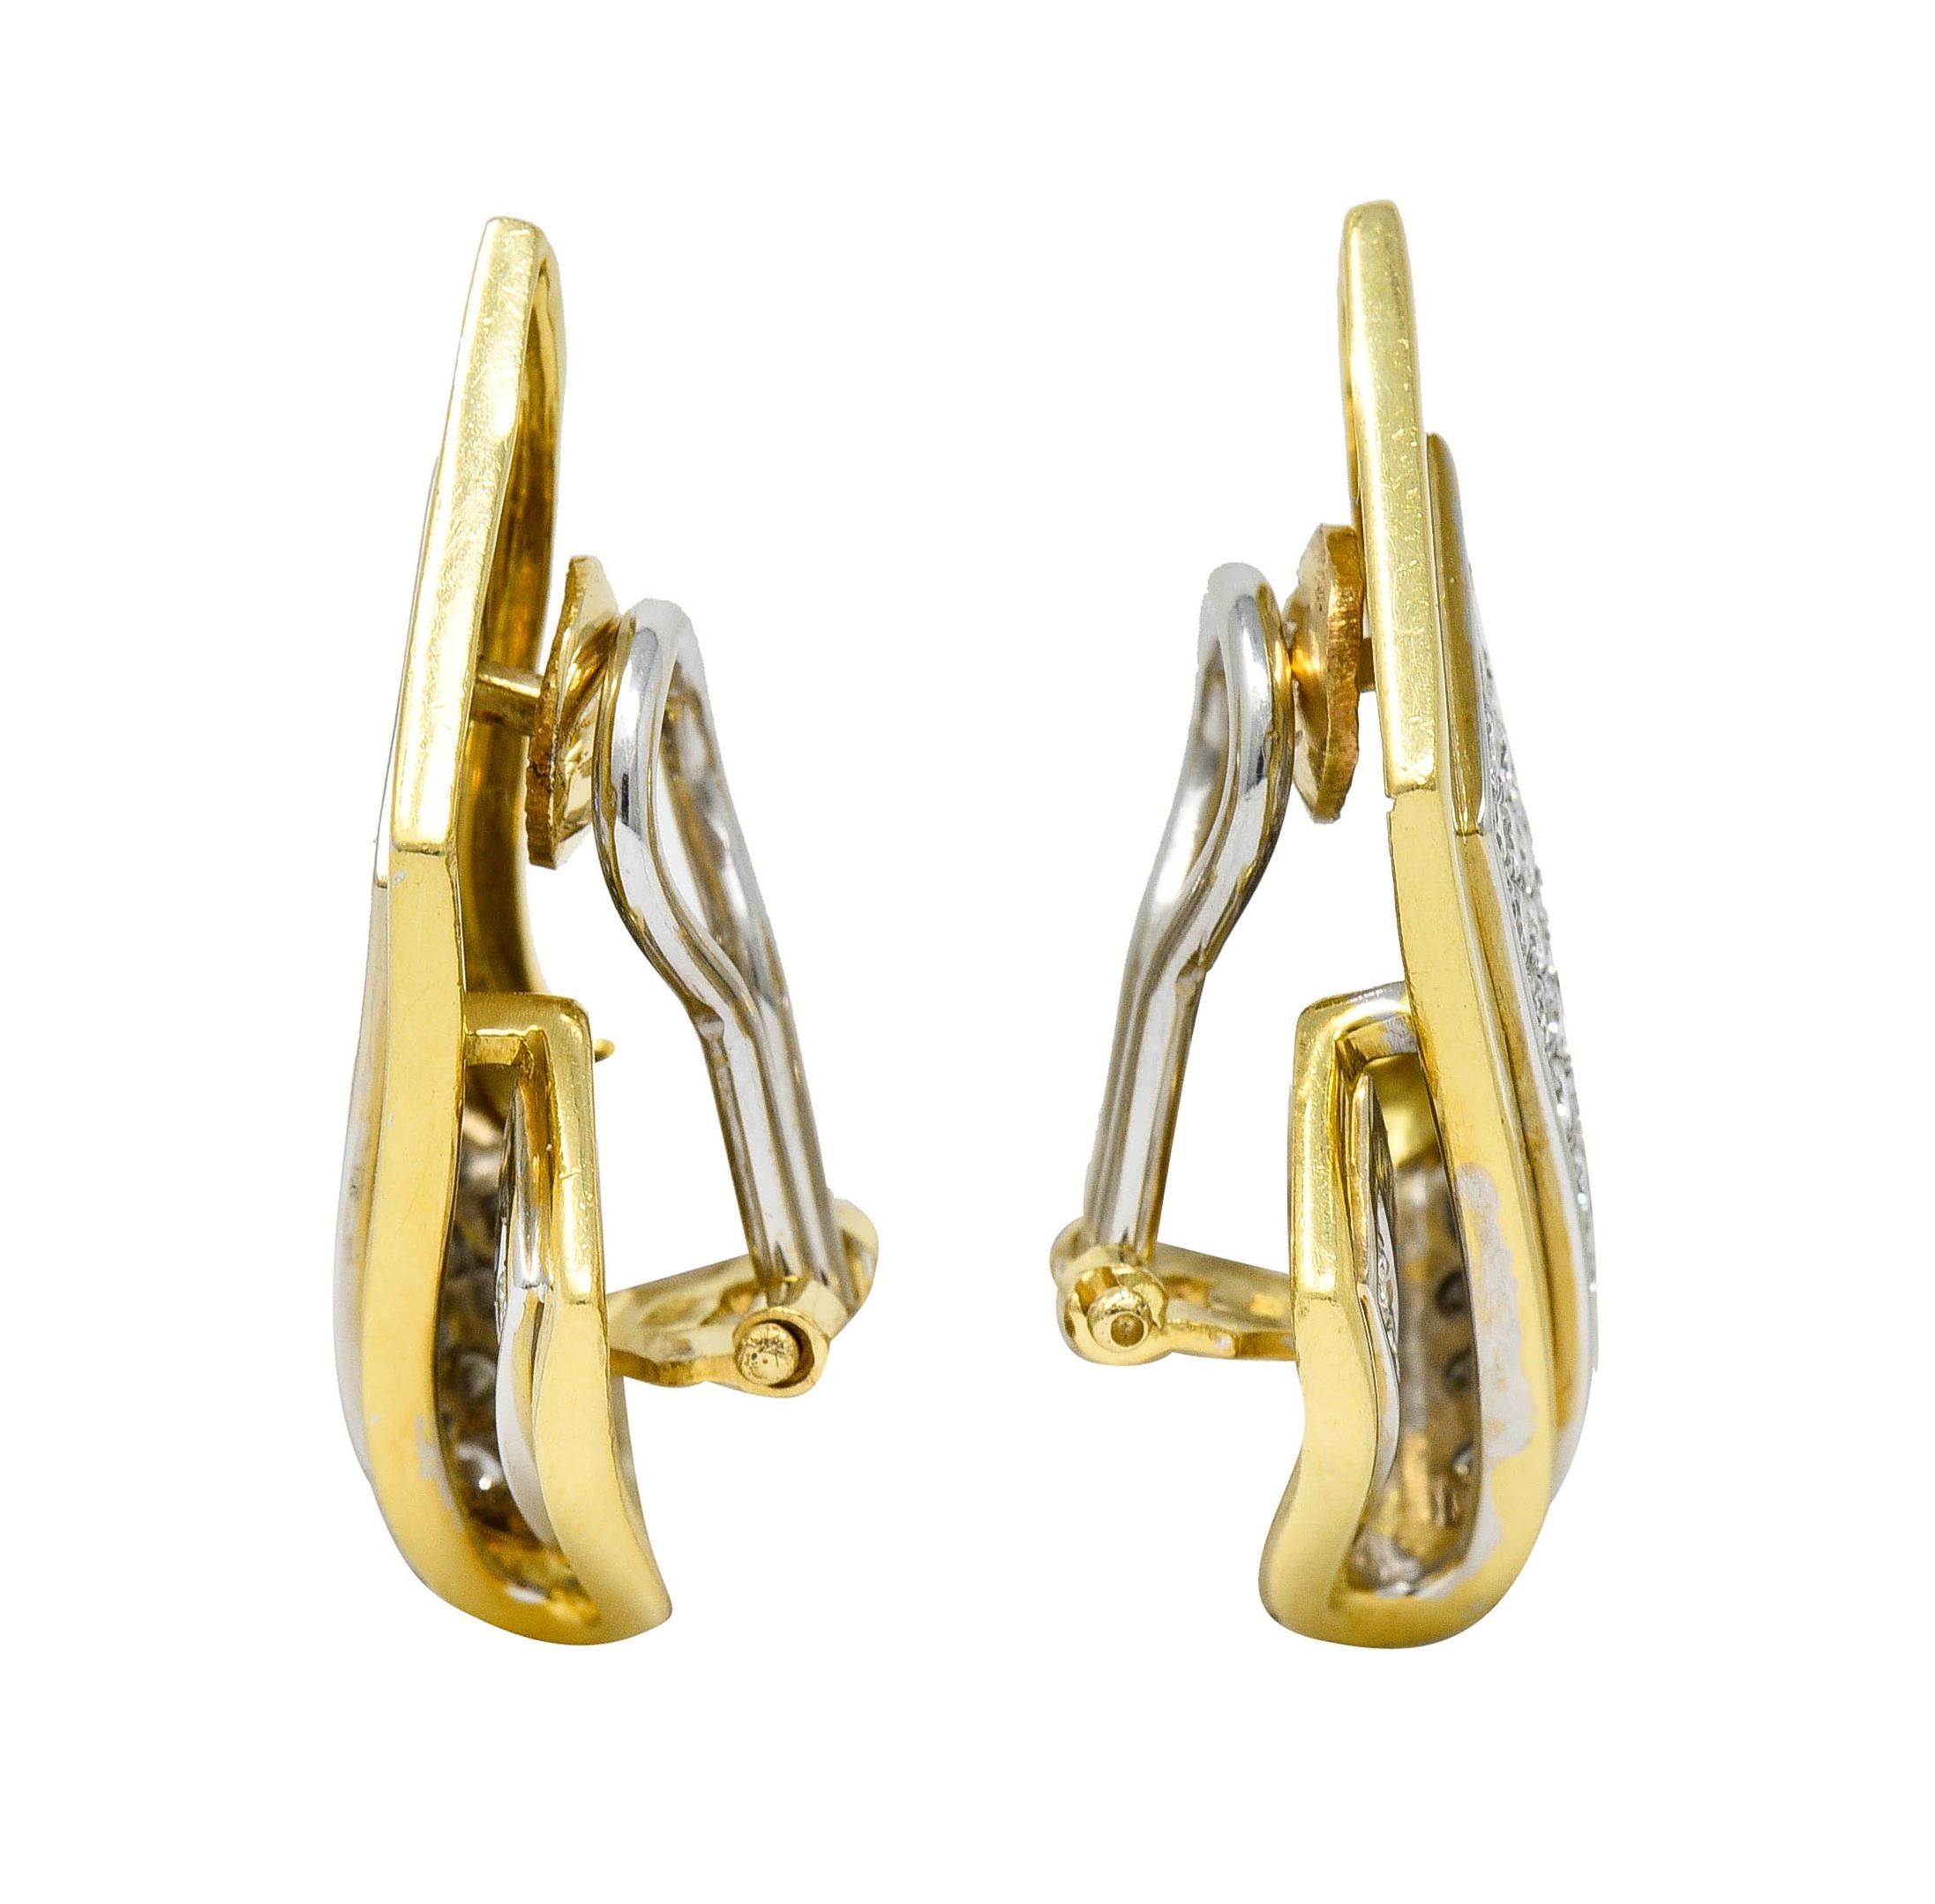 Ear-clips are designed as a folded ribbon motif

Centering round brilliant cut diamonds - pavè set in white gold with a polished yellow gold surround

Weighing in total approximately 2.50 carats with G/H color and VS to SI clarity

Completed by